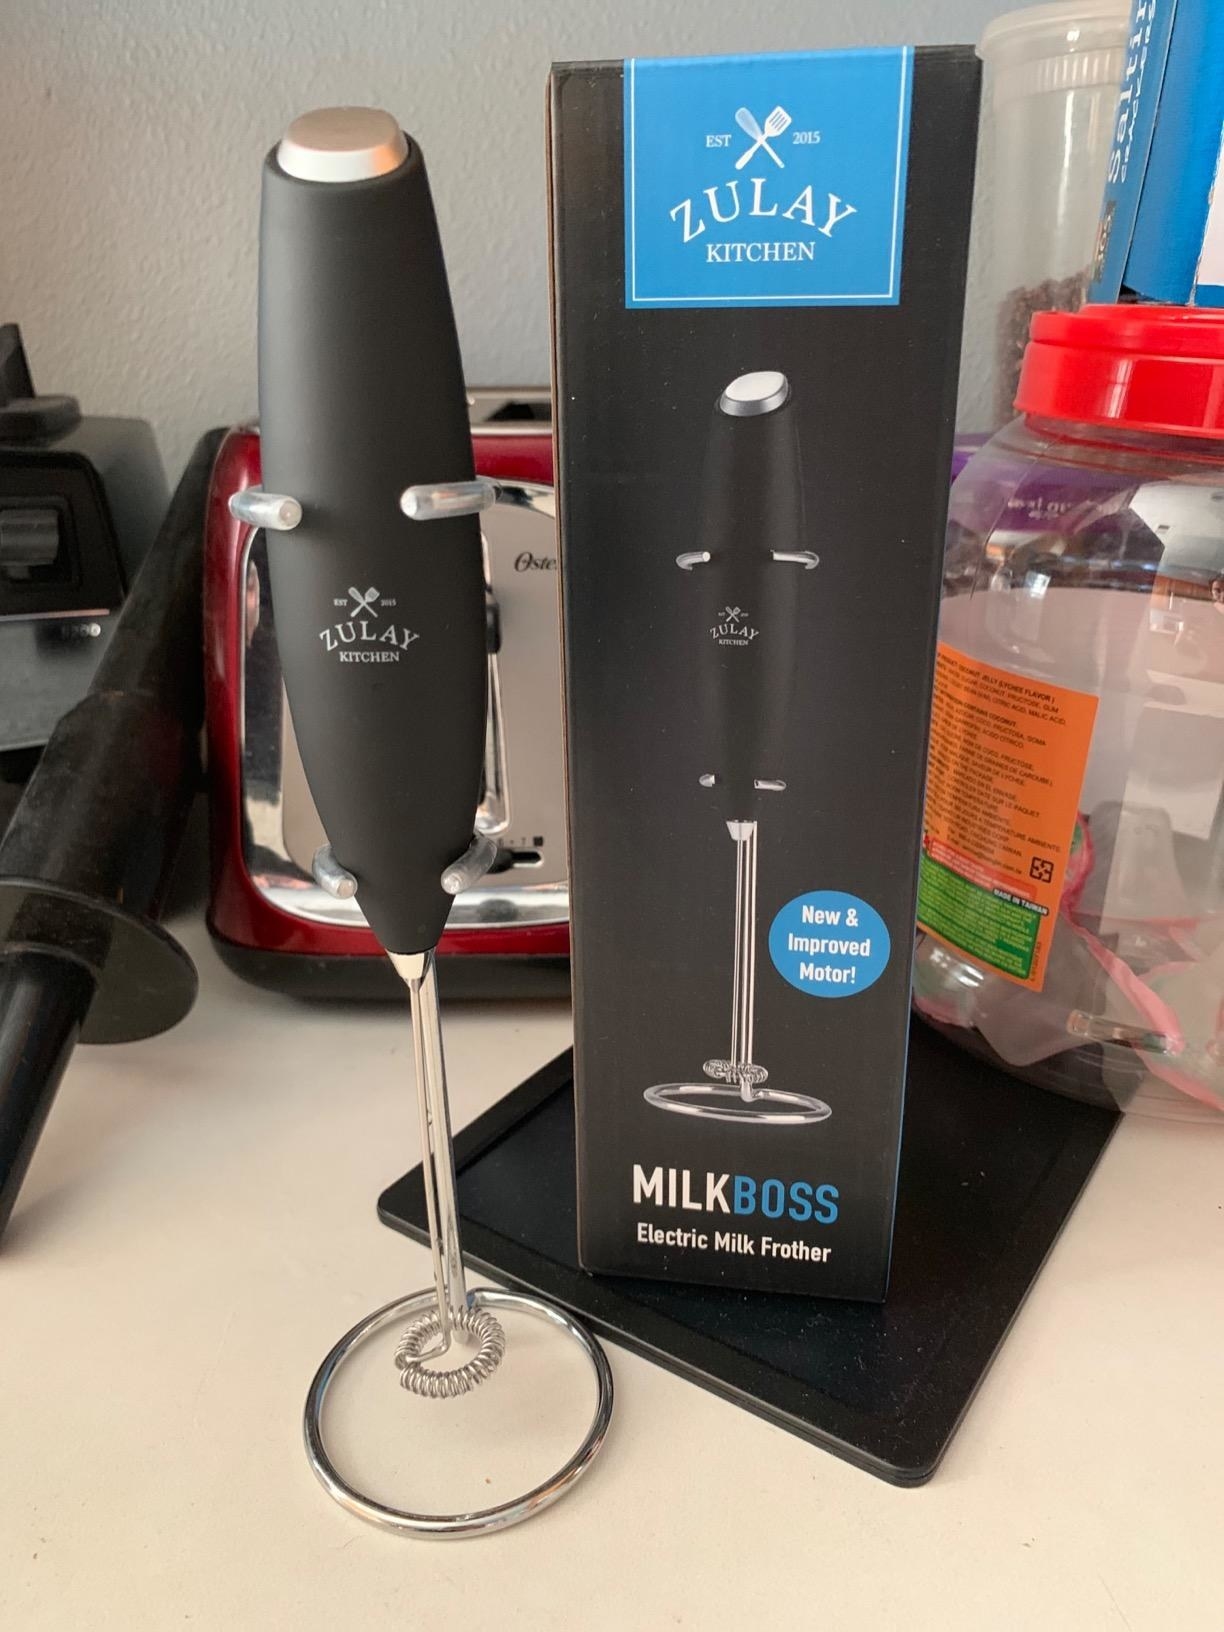 A dark-gray milk frother stood next to its packaging